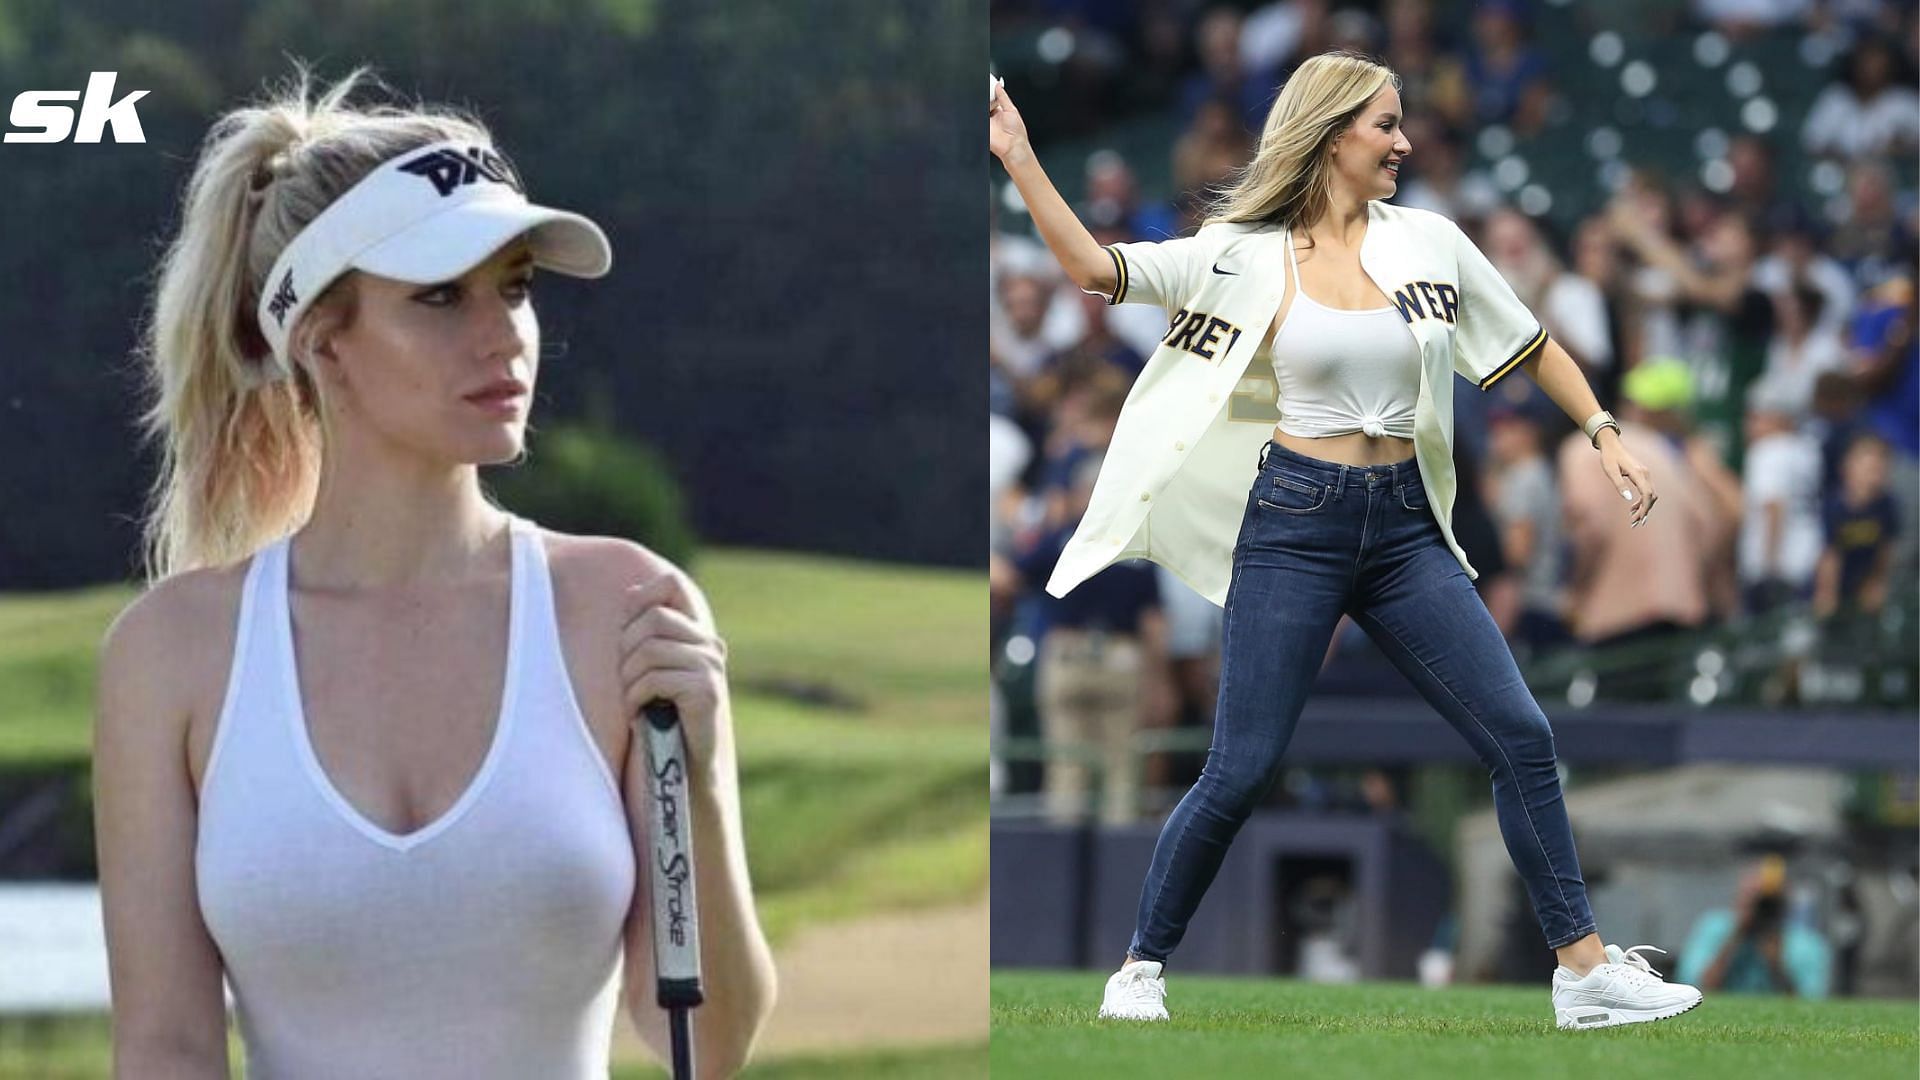 Professional golfer, Paige Spiranac threw the first pitch before a MLB game.